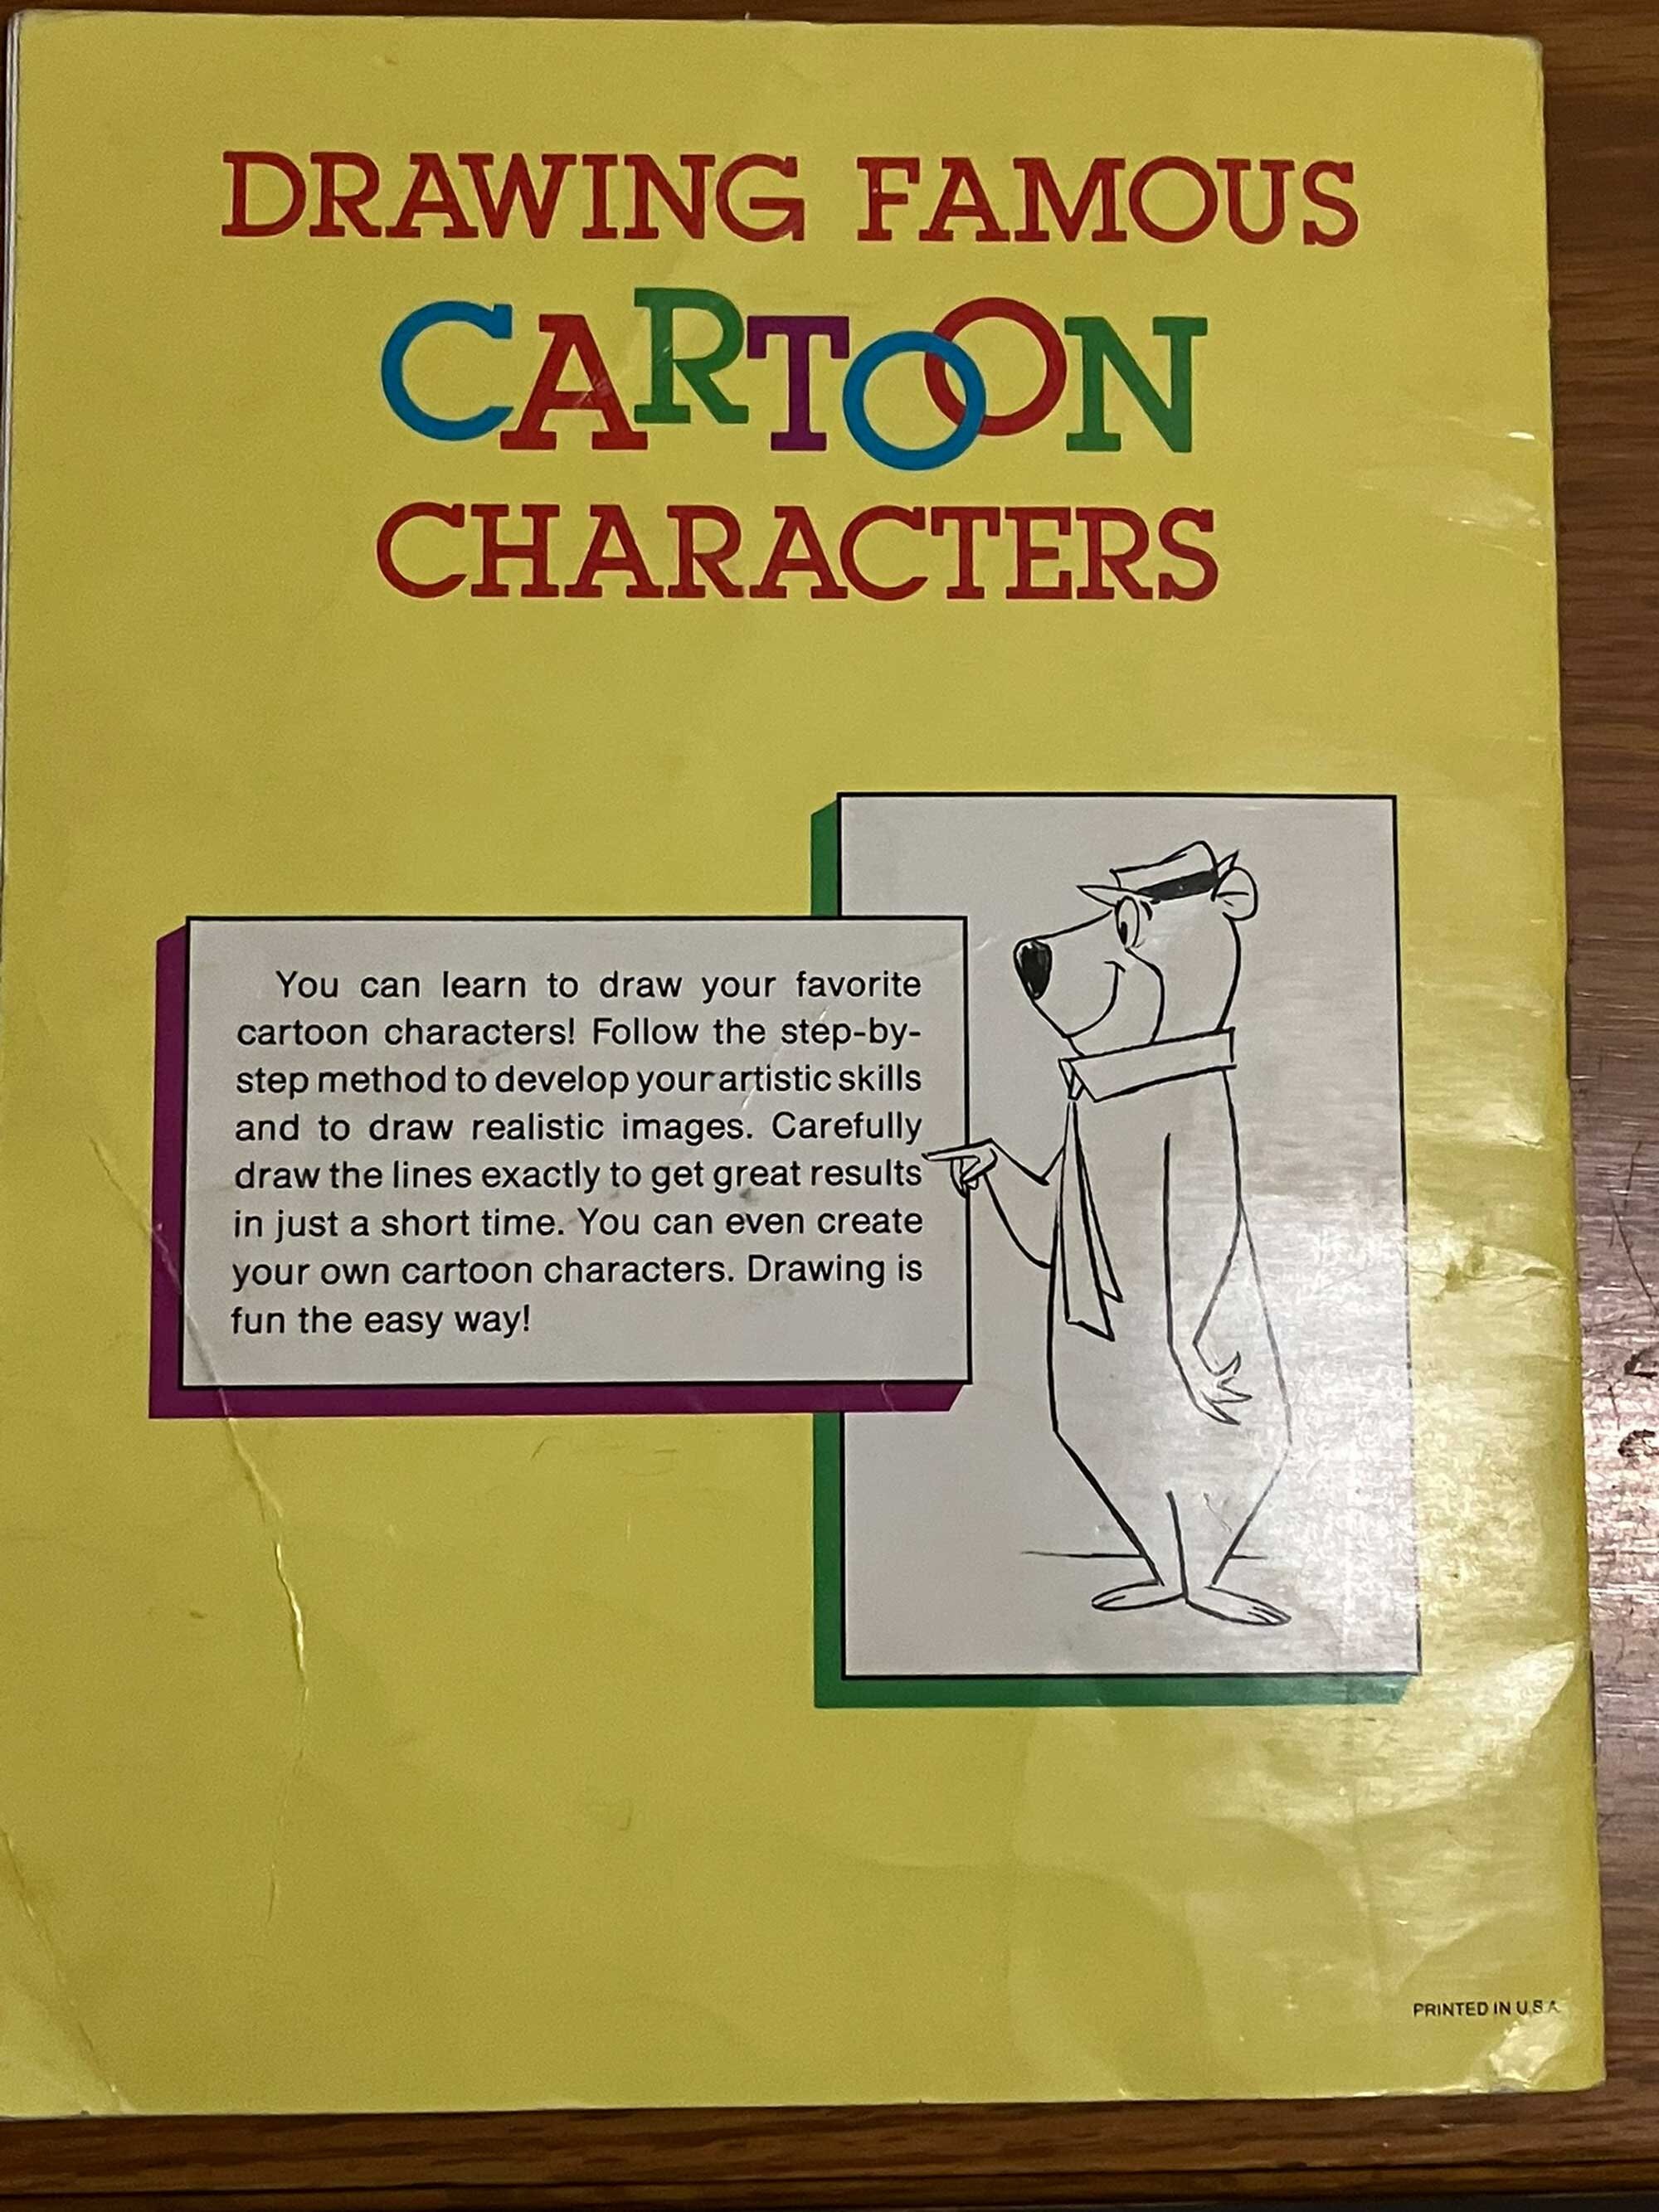 Learn to Draw Cartoons with the (now public domain) 'Famous Artist Cartoon  Course' Textbook, by Random Nerds